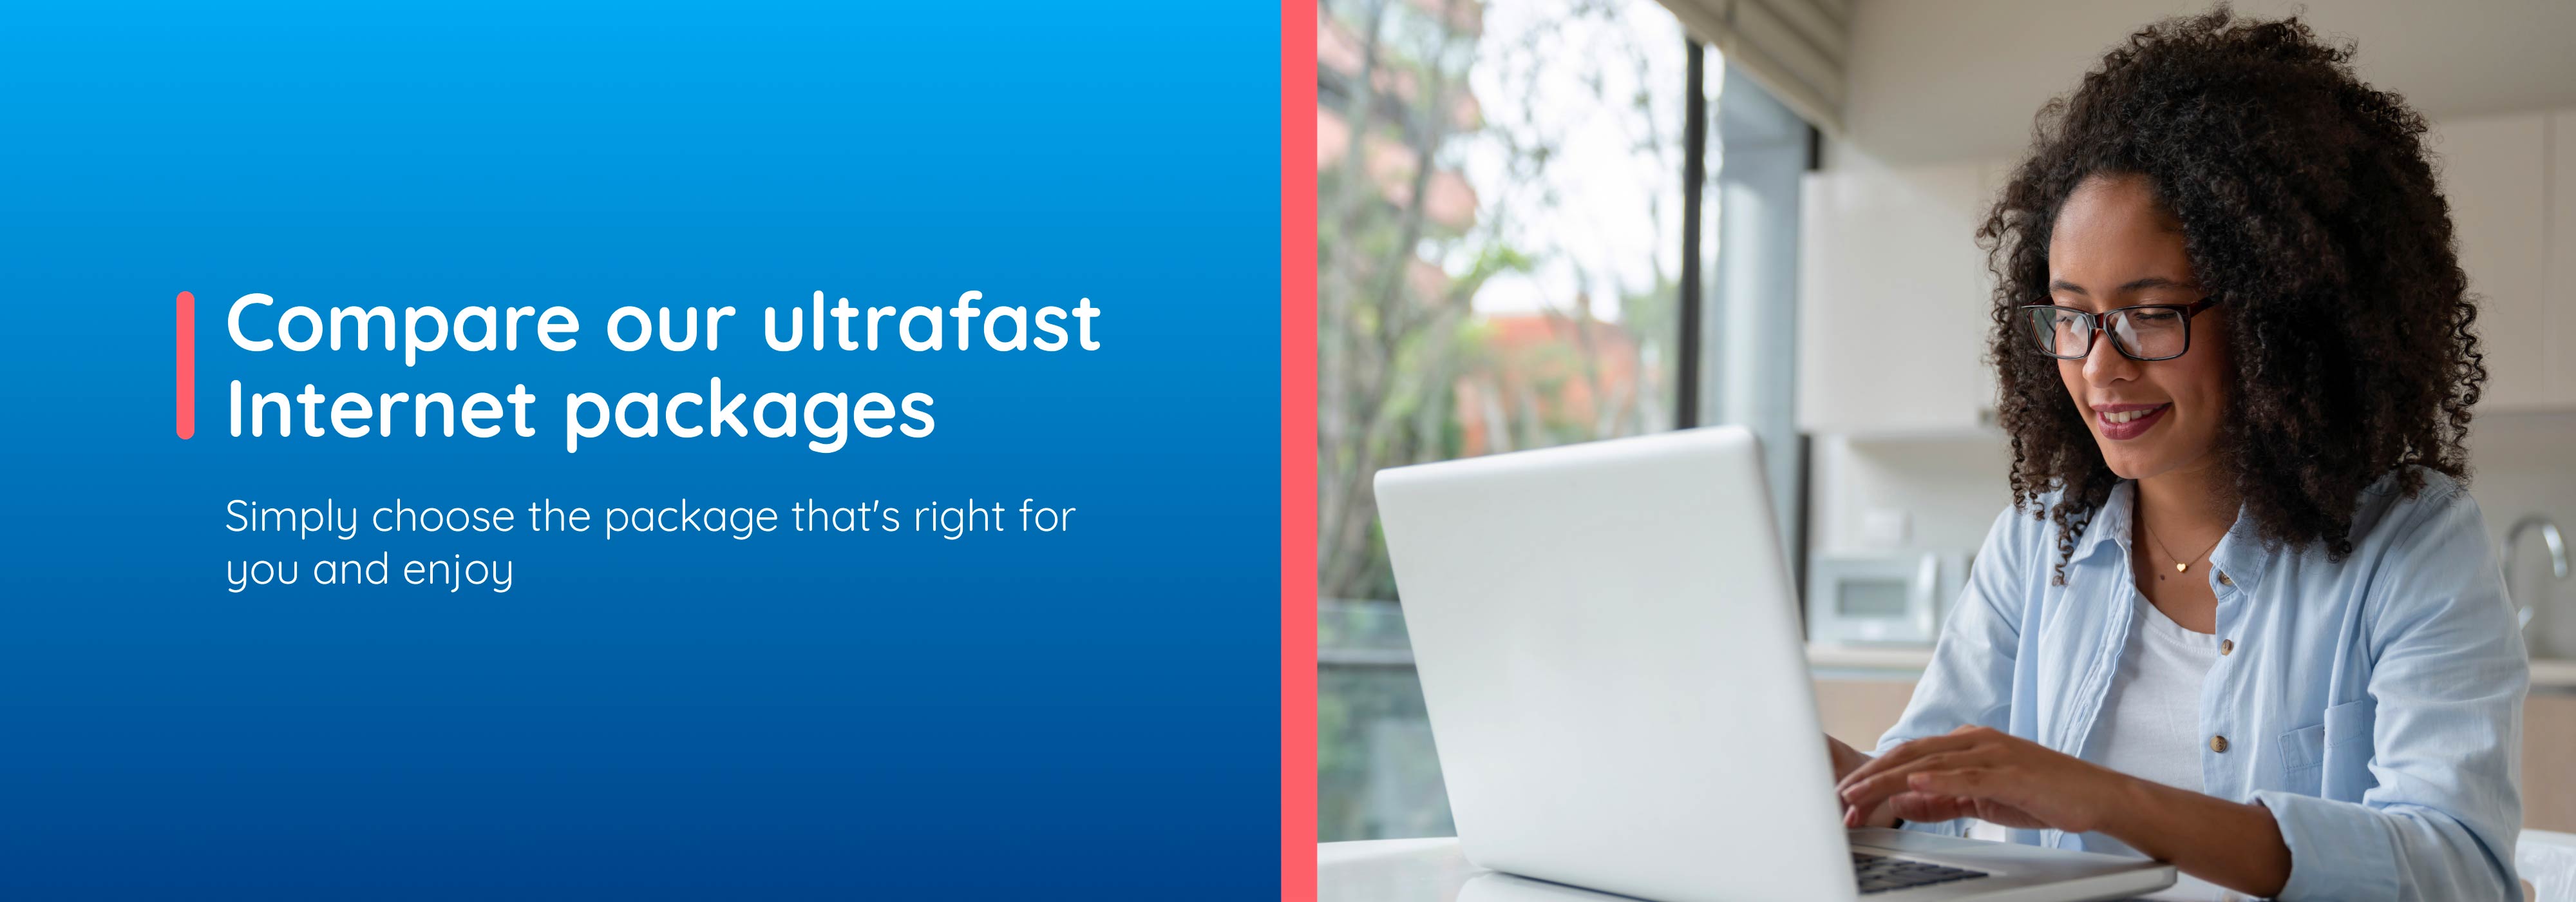 Compare our ultrafast Internet packages.Simply choose the package that's right for you and enjoy